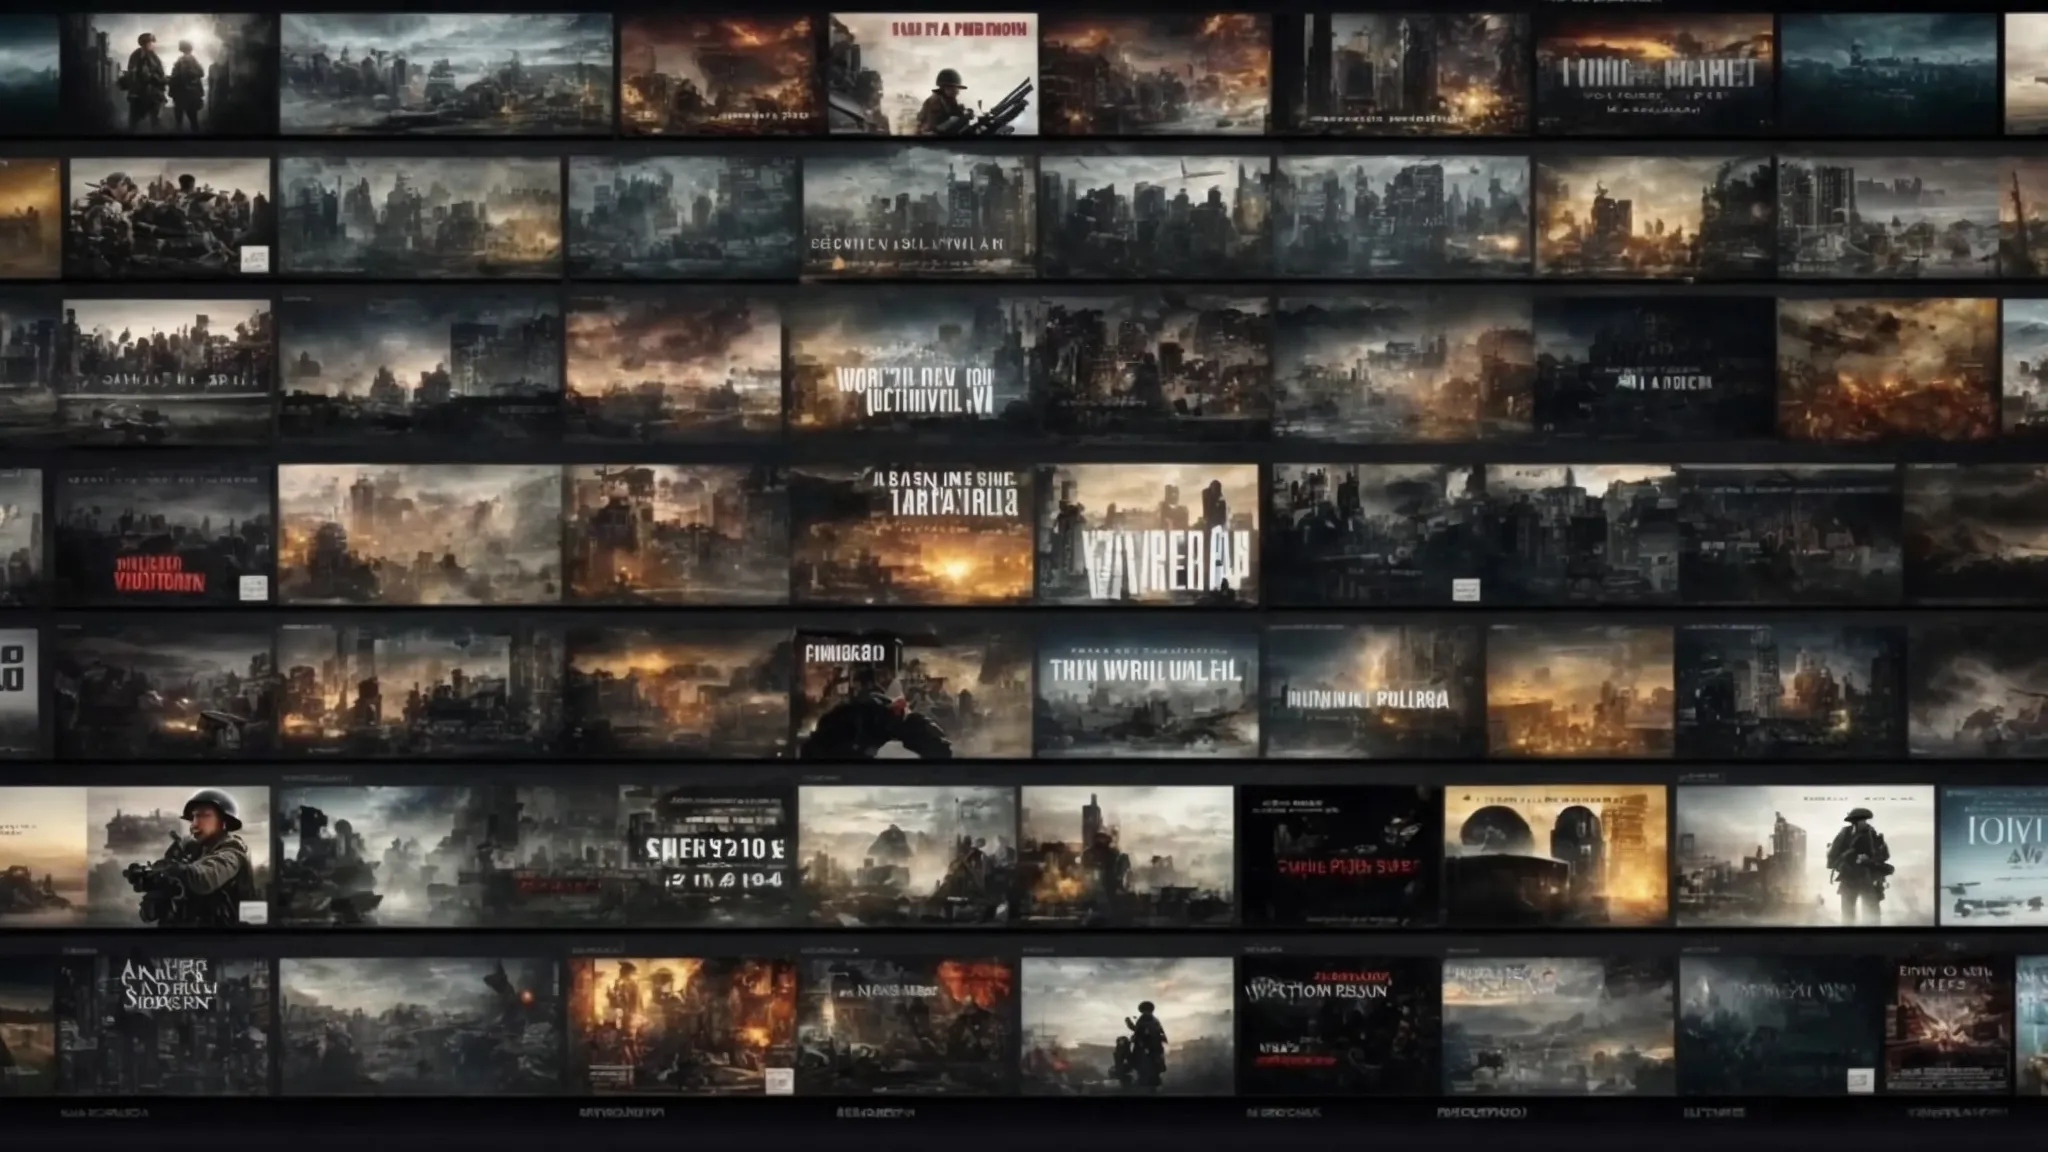 a laptop screen displays a selection of movie titles from various vod platforms, with a world war ii film highlighted.